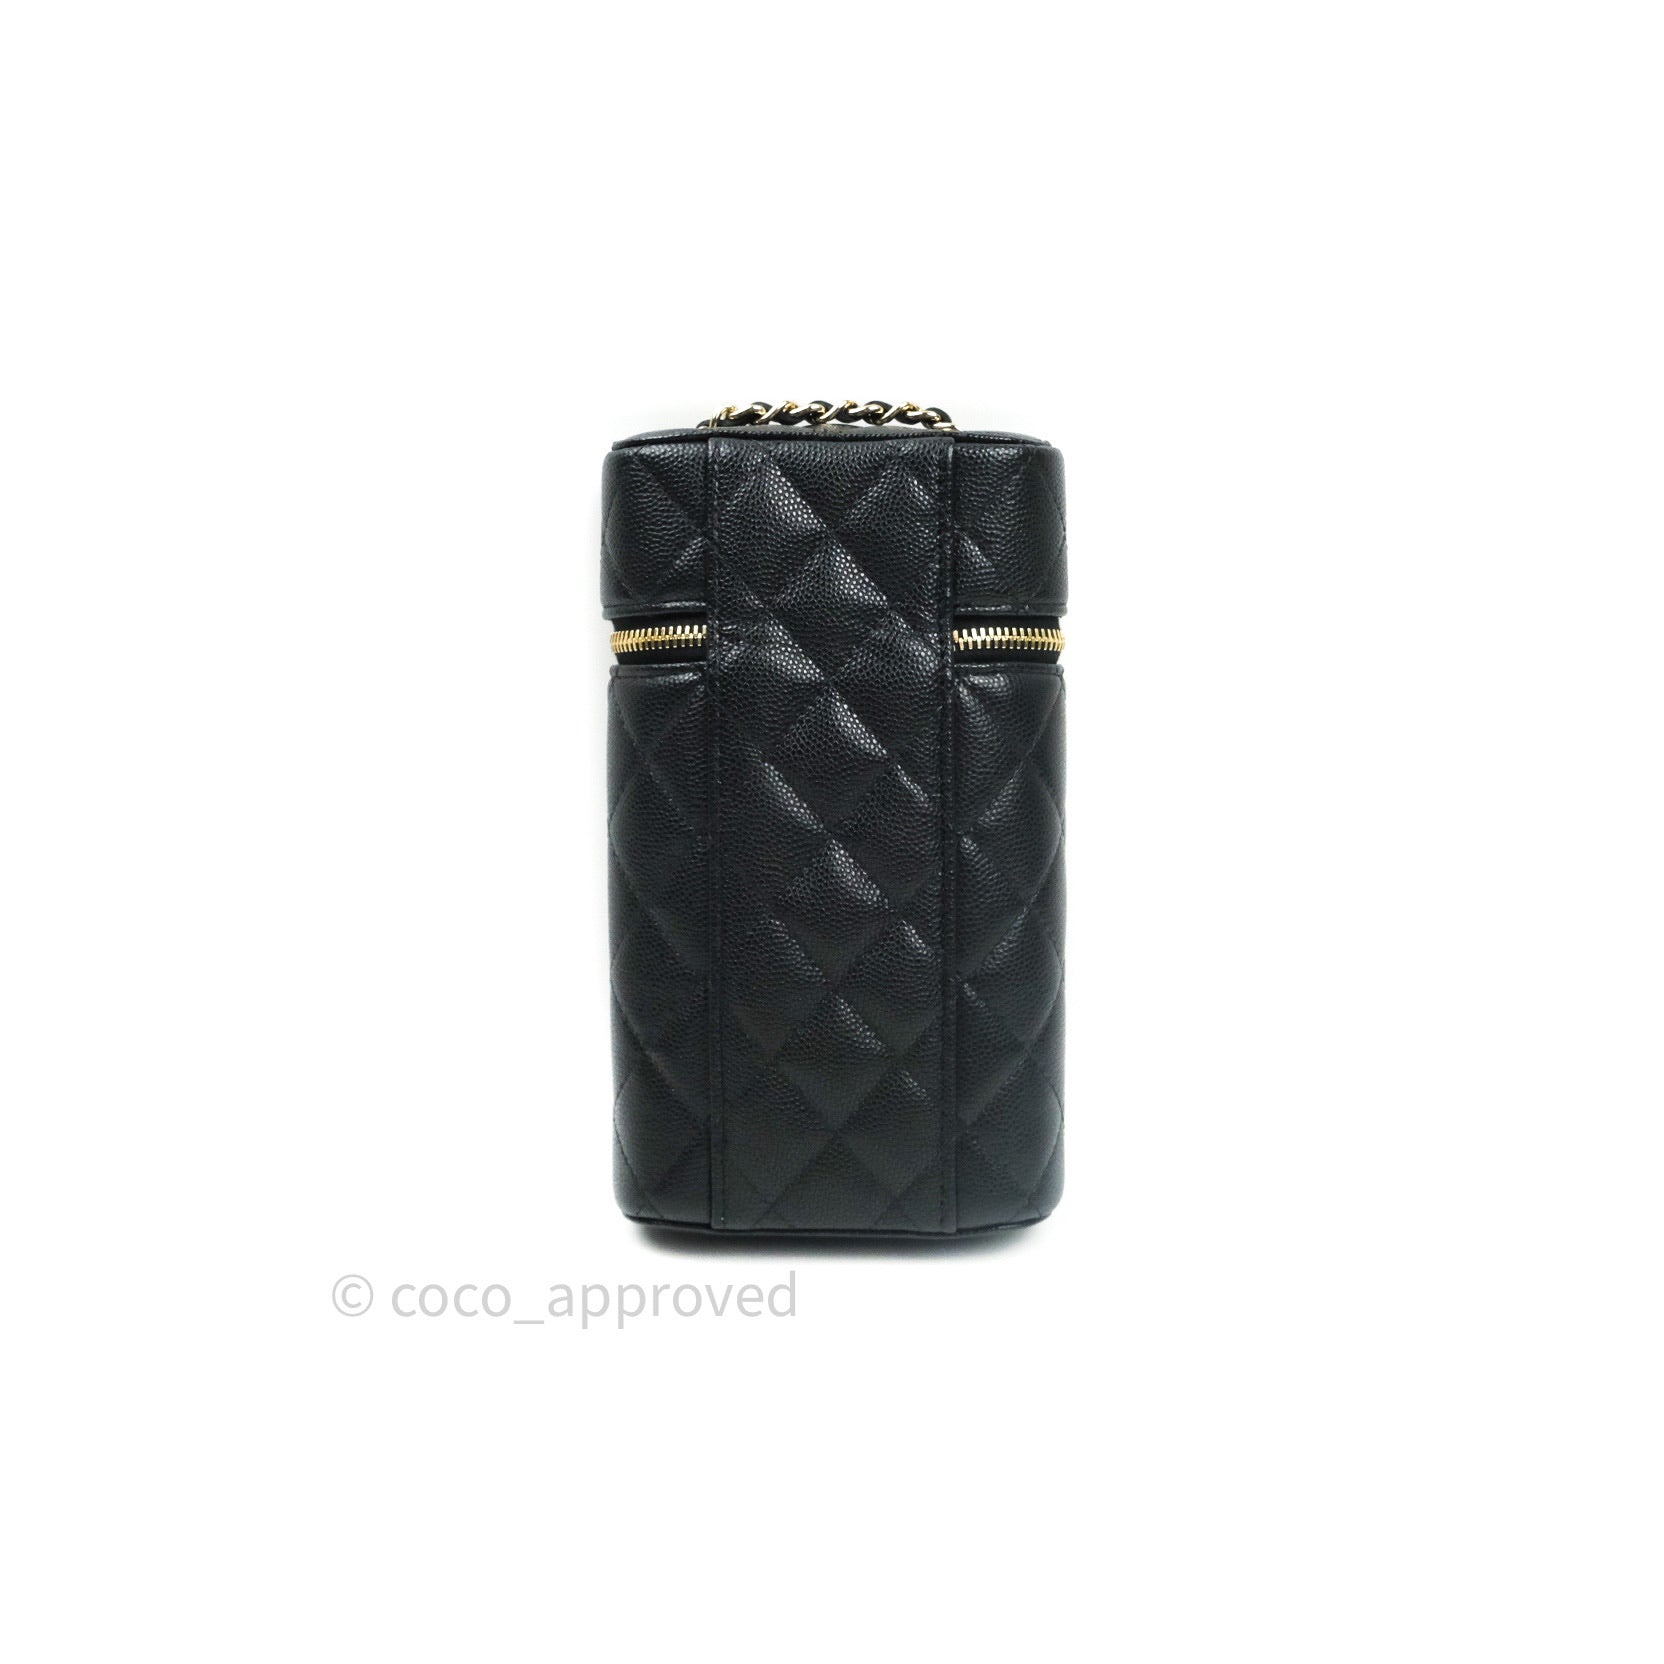 CHANEL Caviar Quilted Classic Phone Holder Black 1144749